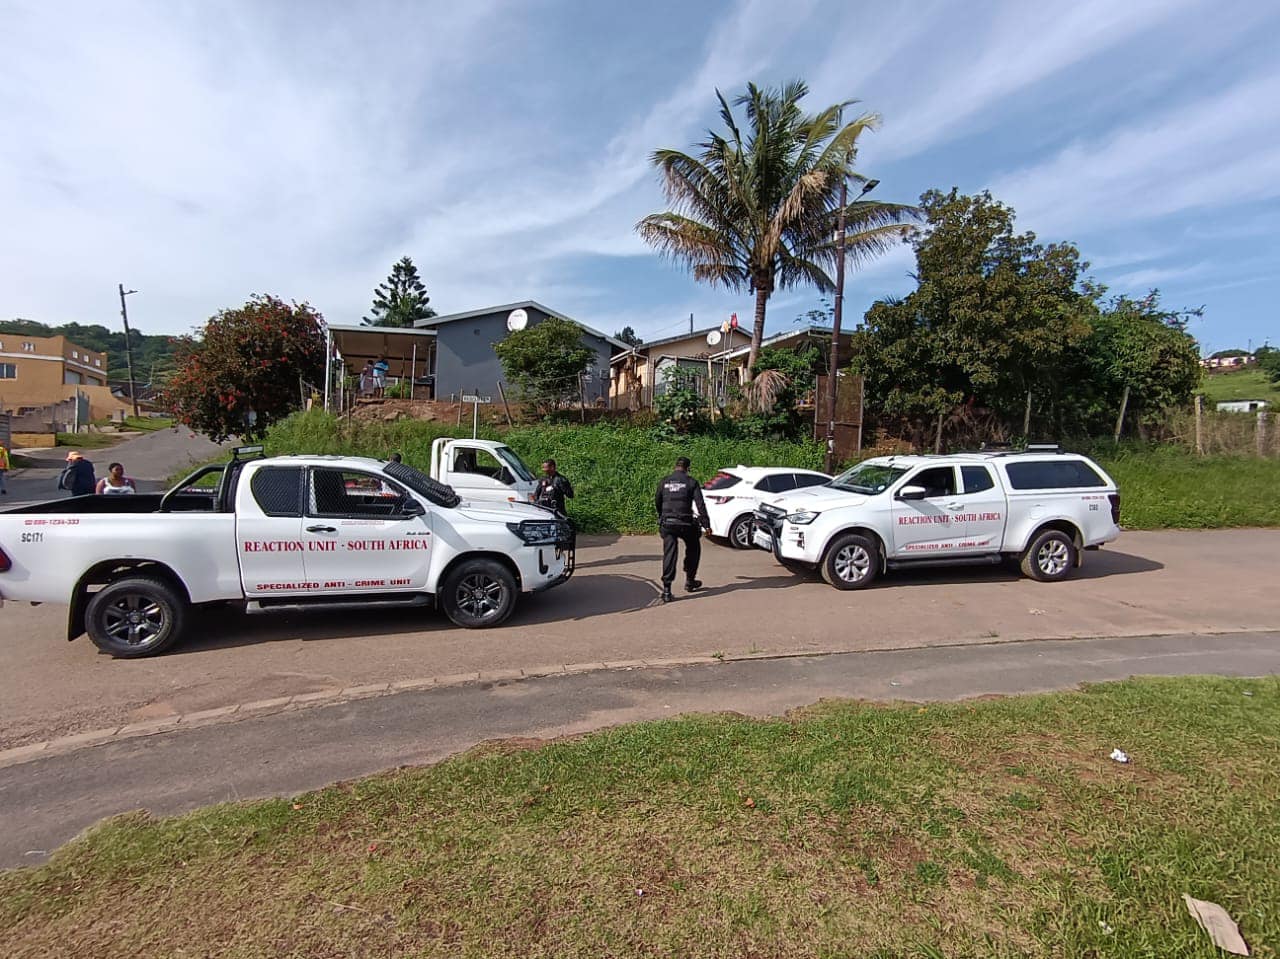 Response officer robbed of firearm in Redcliffe